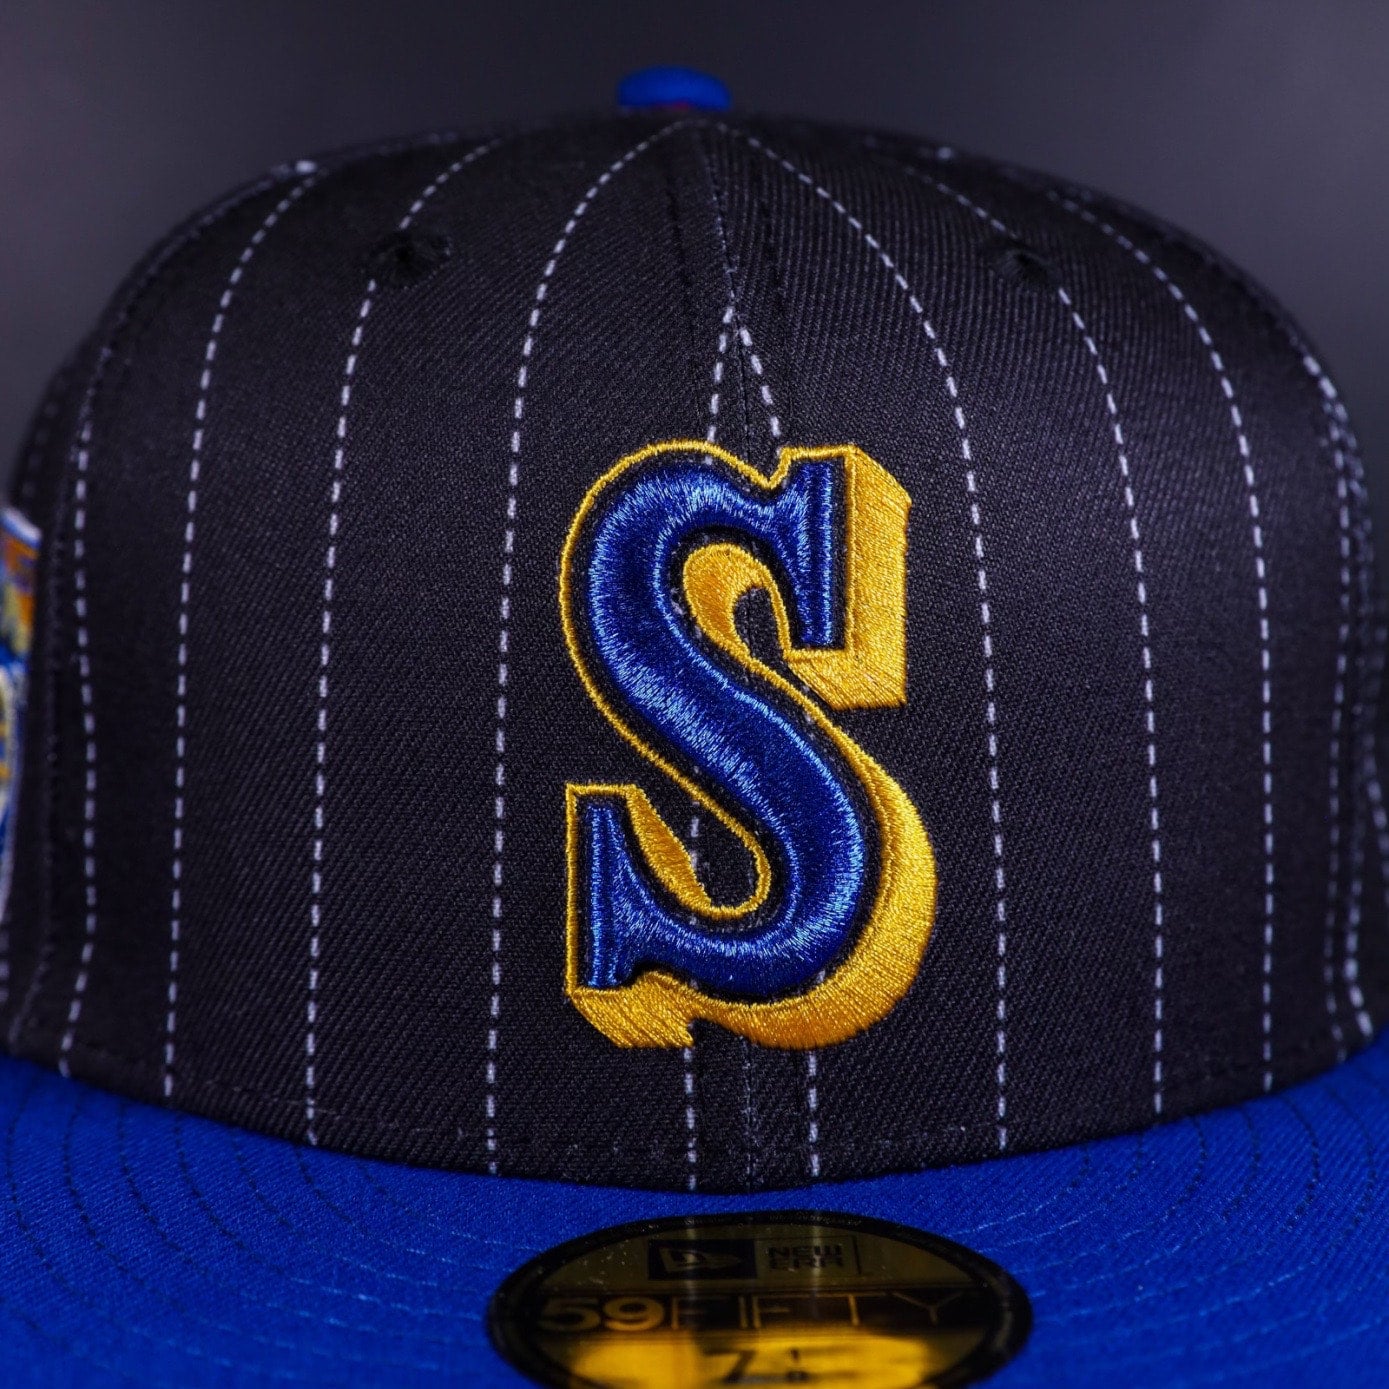 59FIFTY Seattle Mariners Cream/Royal/Gray 40th Anniversary Patch